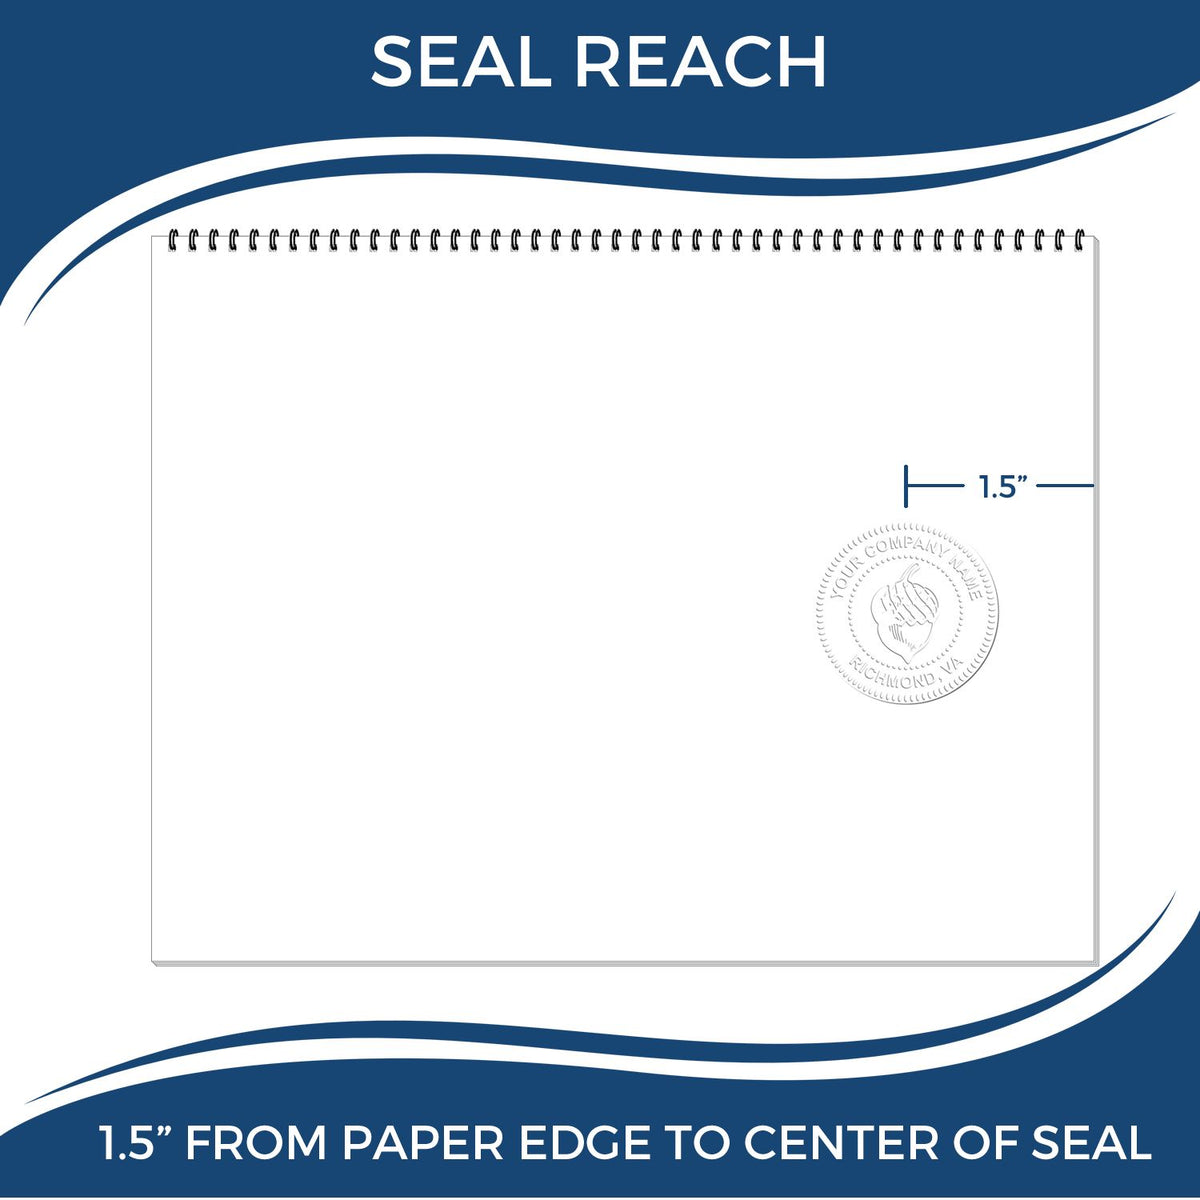 An infographic showing the seal reach which is represented by a ruler and a miniature seal image of the Hawaii Engineer Desk Seal